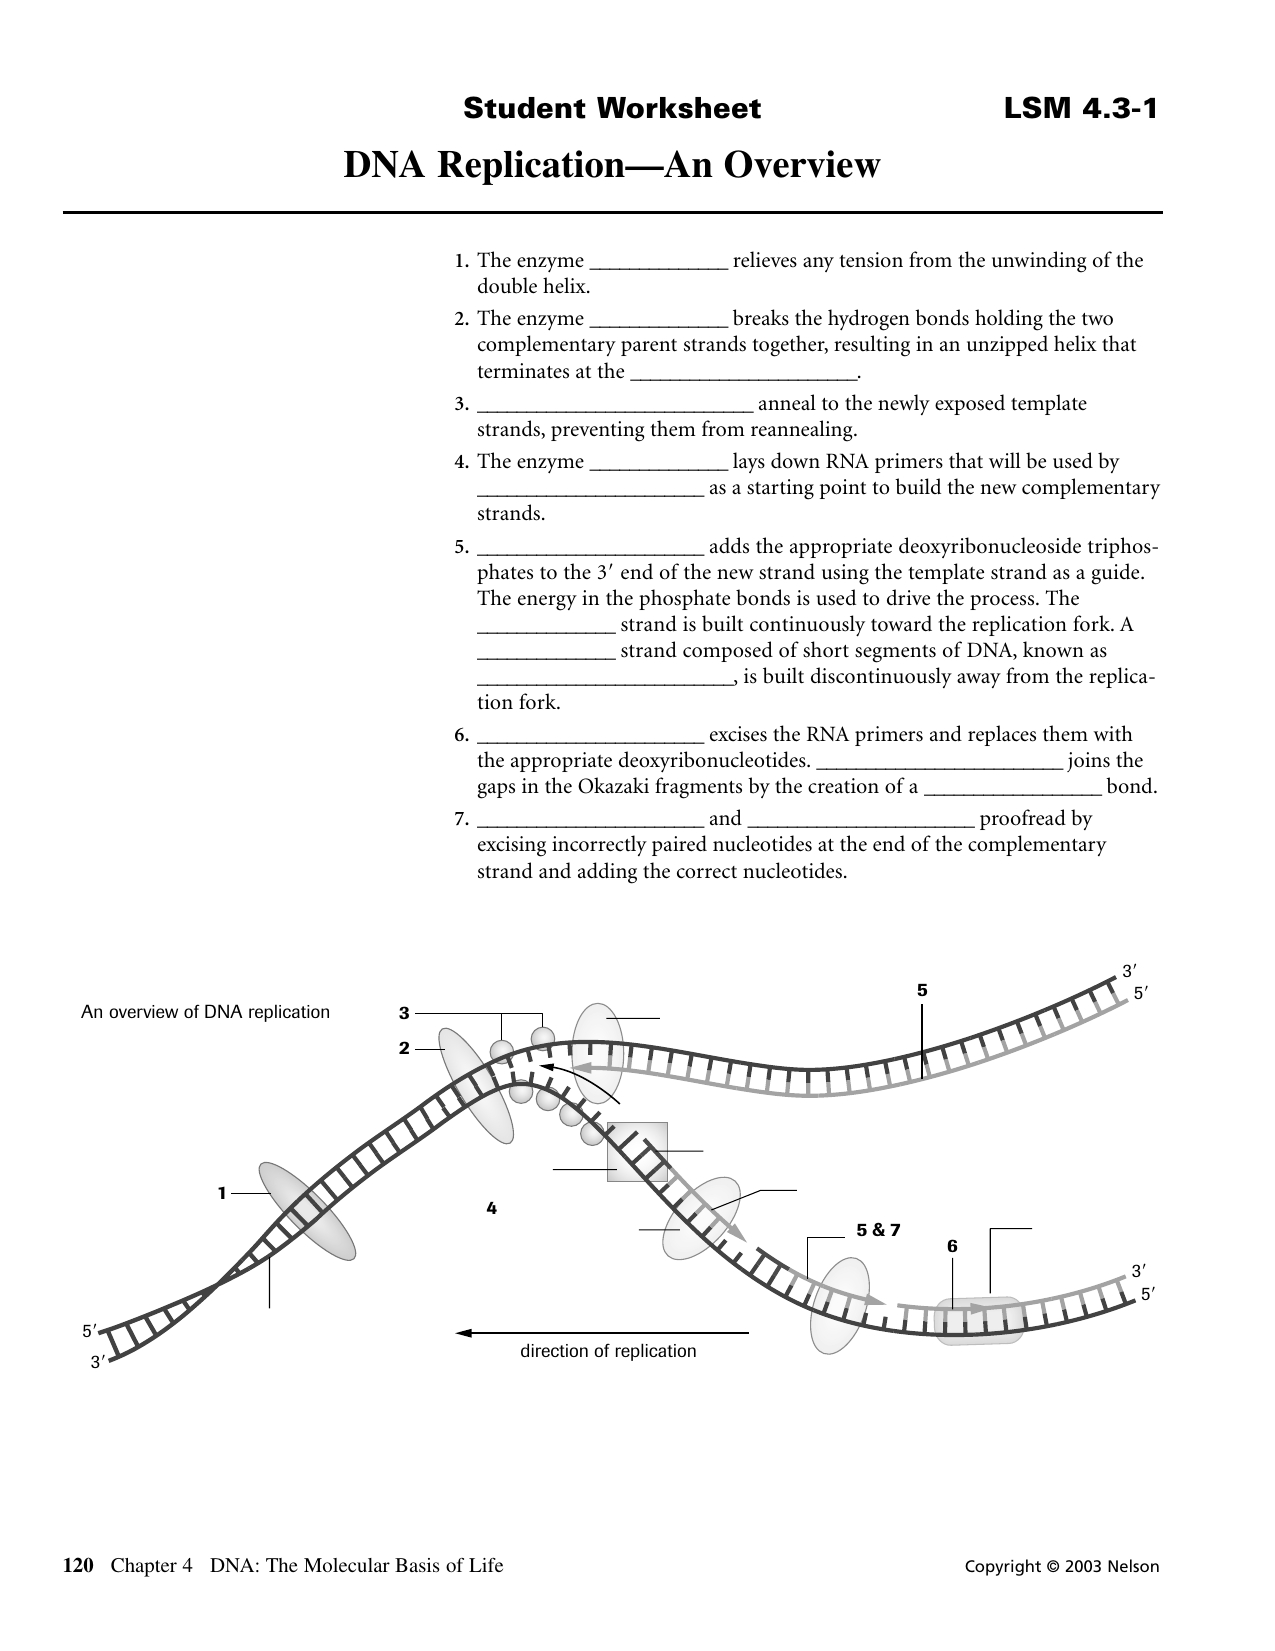 Dna Replication—An Overview And Dna And Replication Worksheet